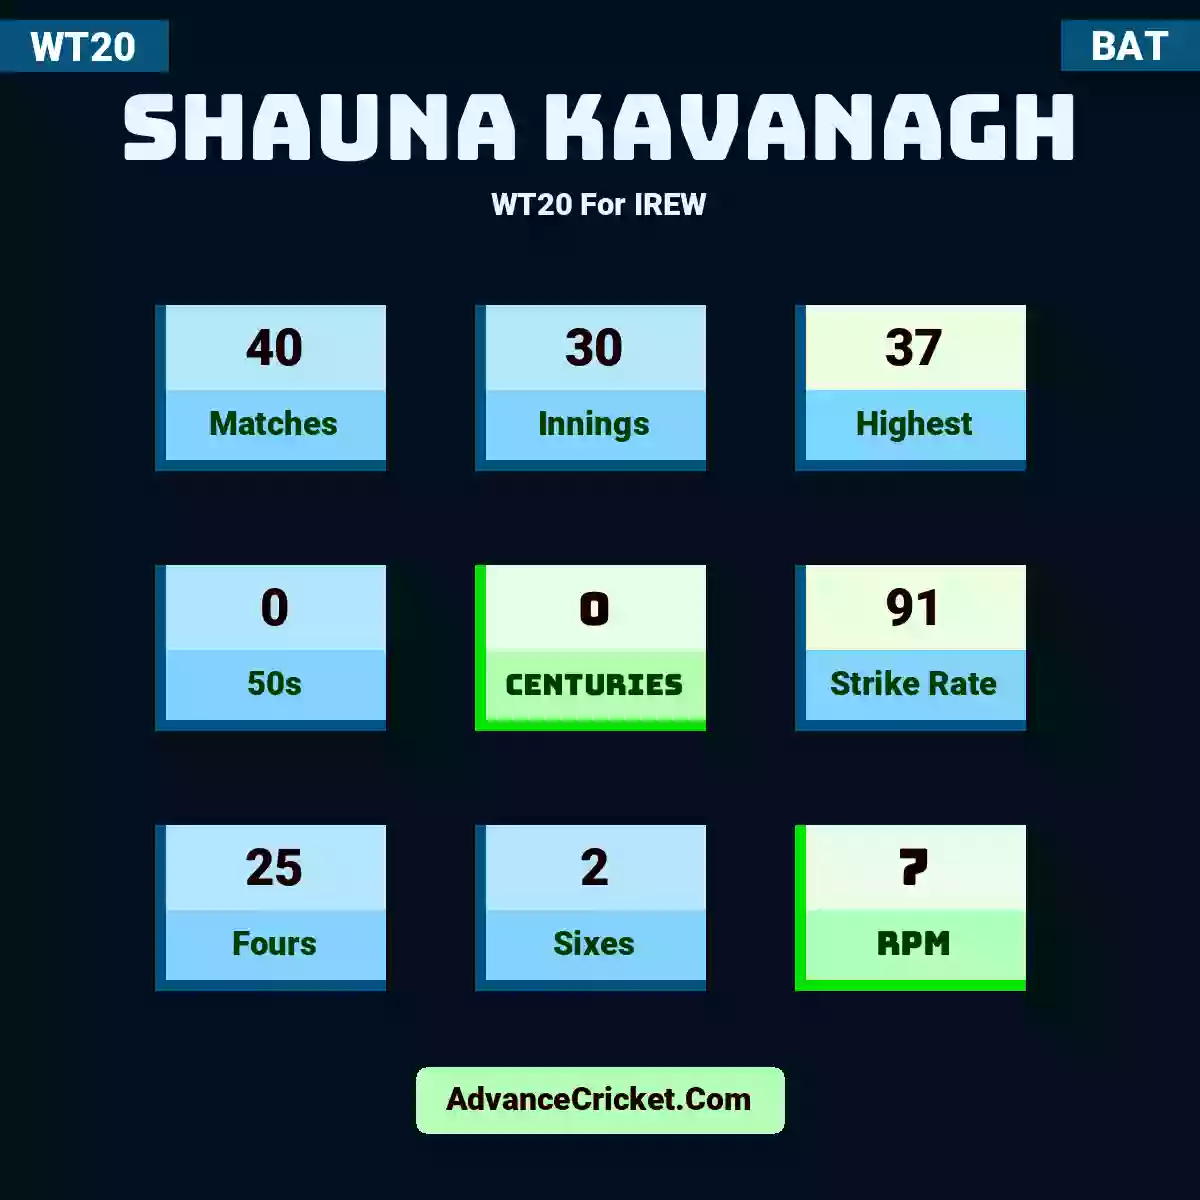 Shauna Kavanagh WT20  For IREW, Shauna Kavanagh played 40 matches, scored 37 runs as highest, 0 half-centuries, and 0 centuries, with a strike rate of 91. S.Kavanagh hit 25 fours and 2 sixes, with an RPM of 7.